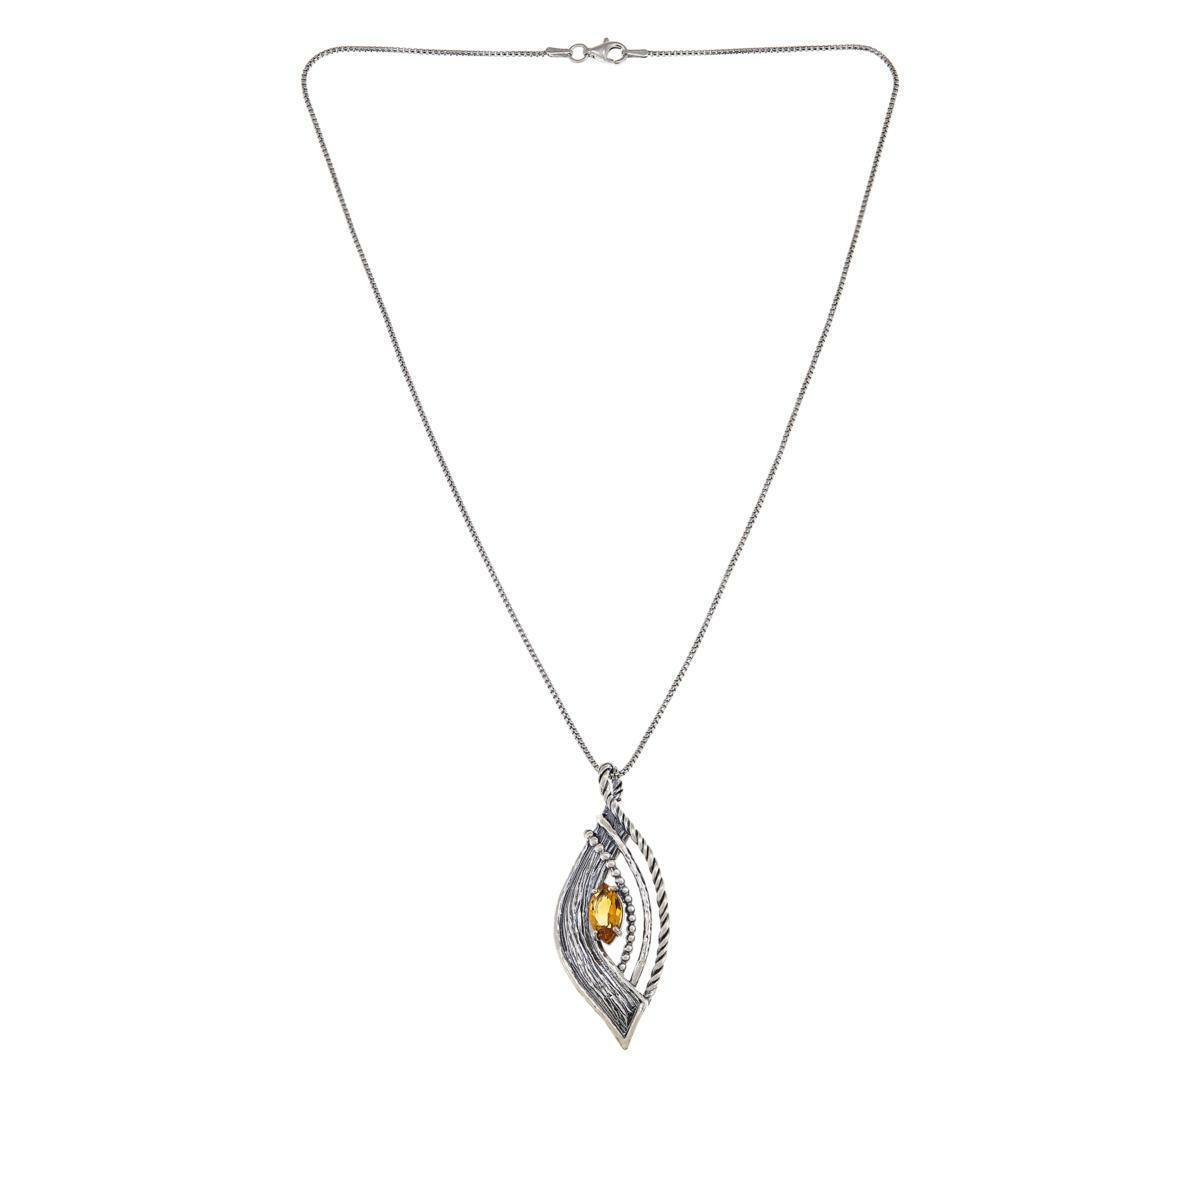 LiPaz Sterling Silver Marquise Citrine Pendant with 18" Chain